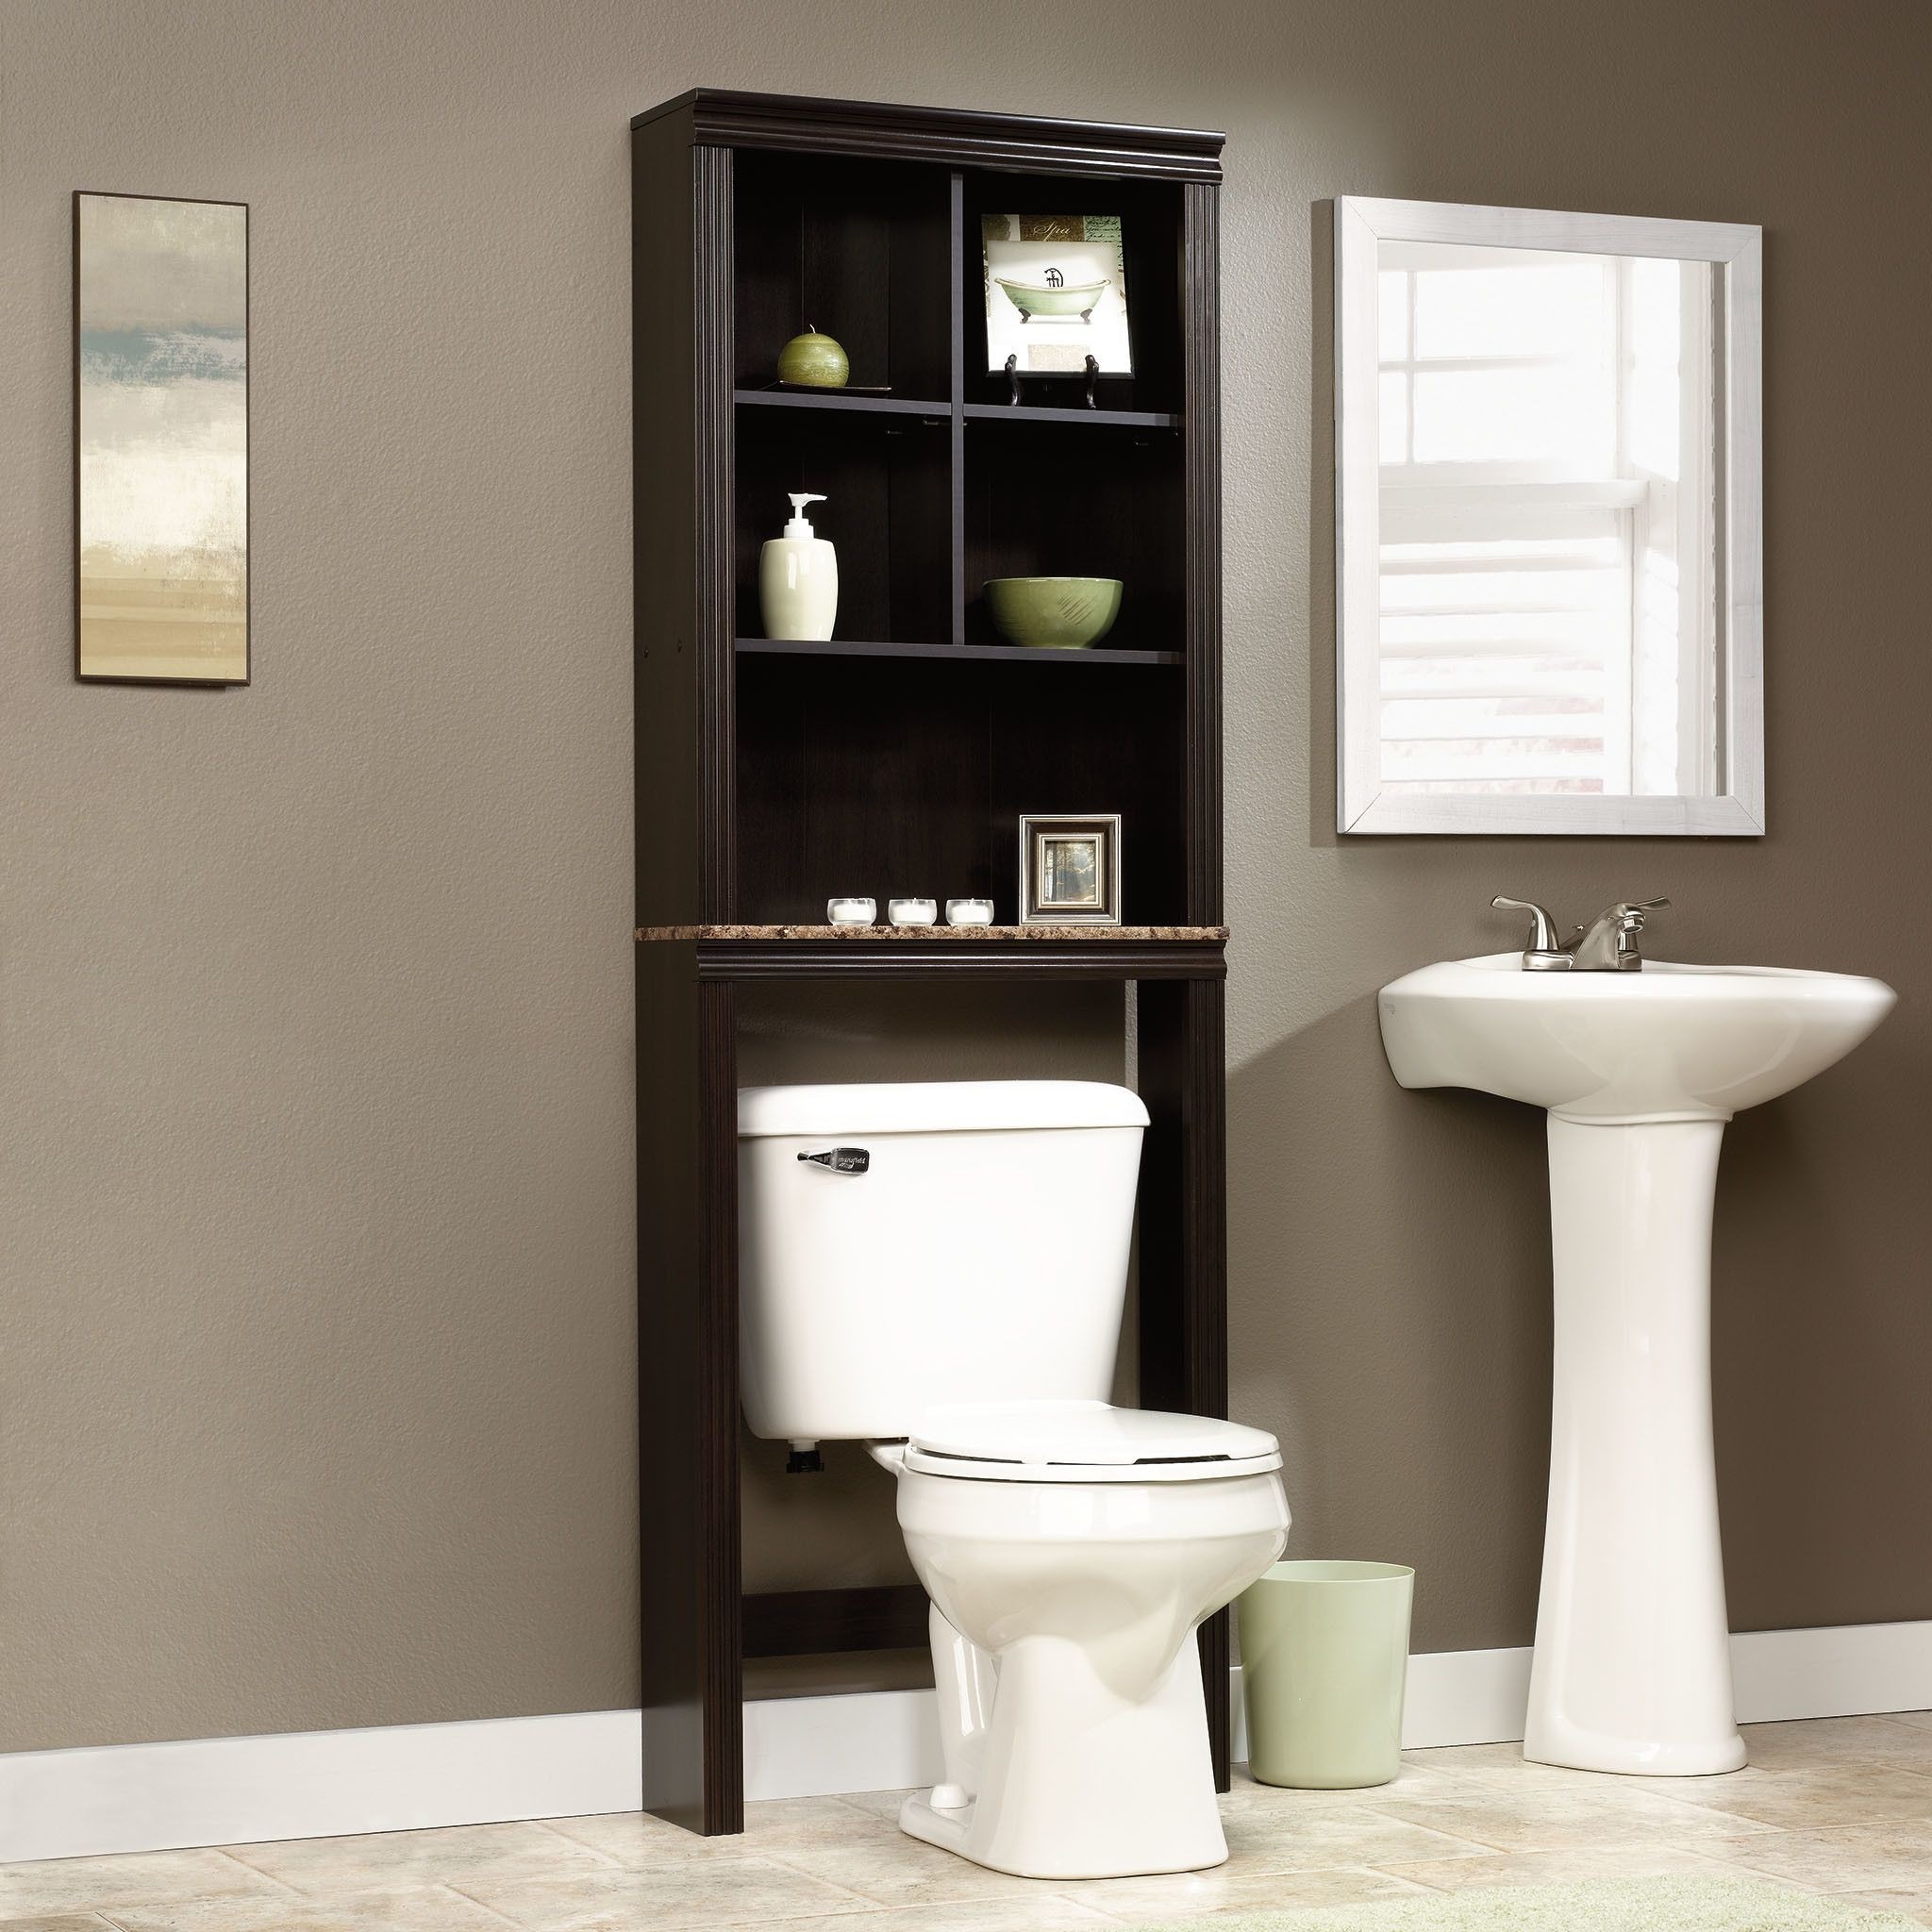 Household Essentials Faux Concrete 8055-1 Over The Toilet Space Saving Metal Shelves for Bathroom